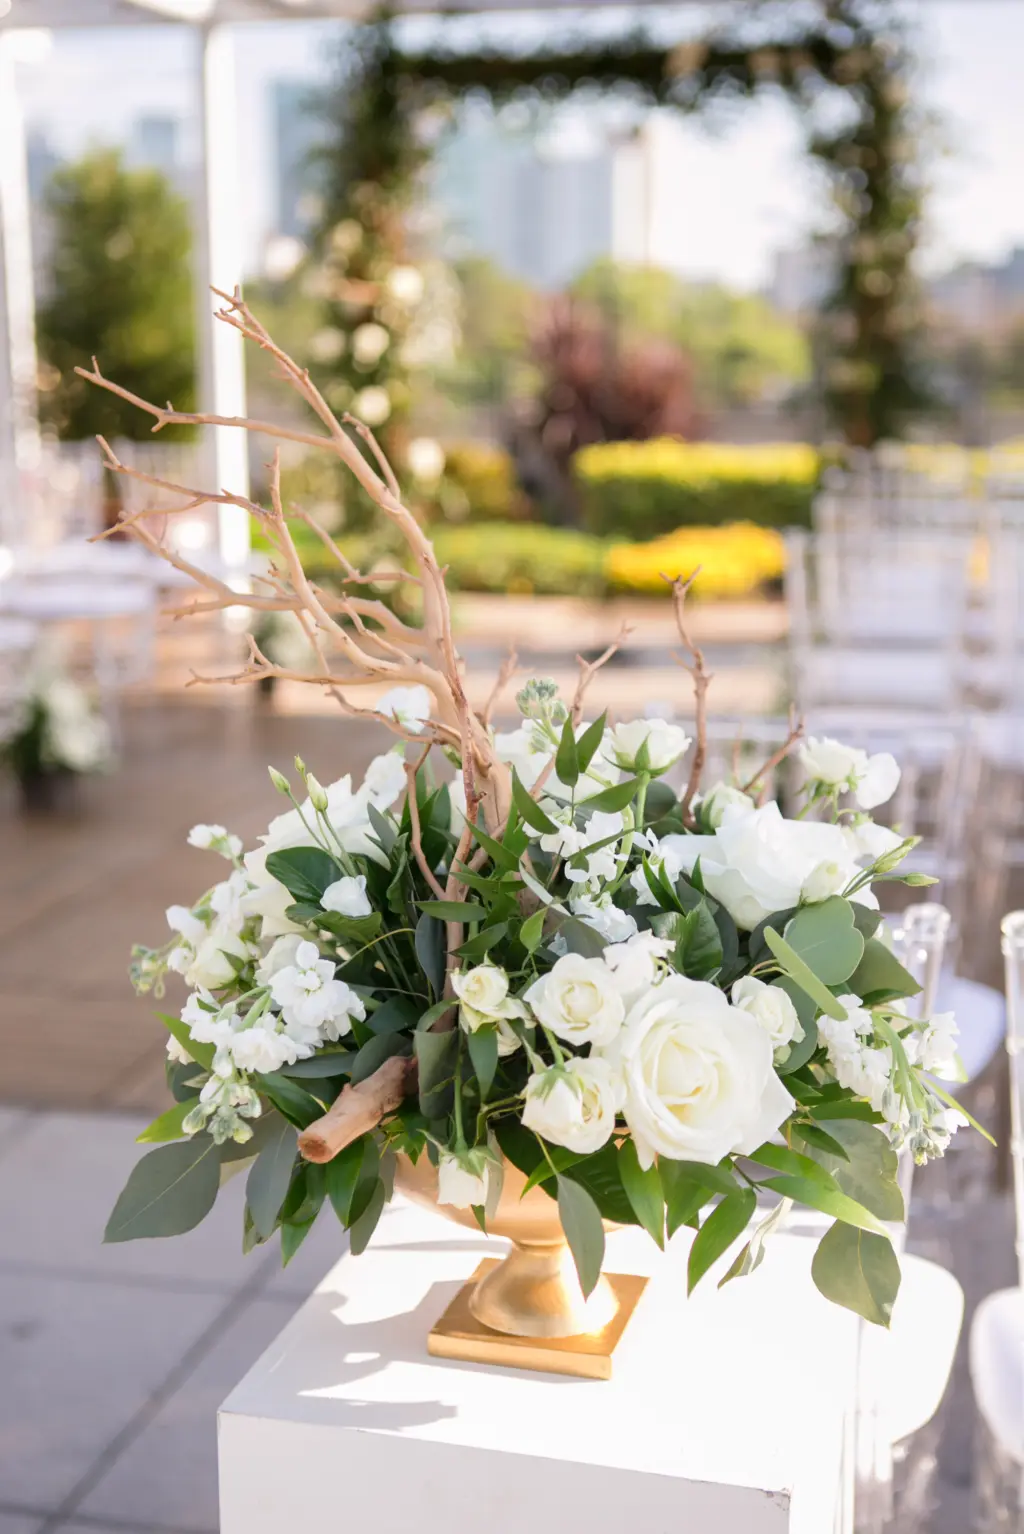 White Roses, Stock Flowers, and Greenery with Wood Branch | Wedding Ceremony Aisle Decor Ideas